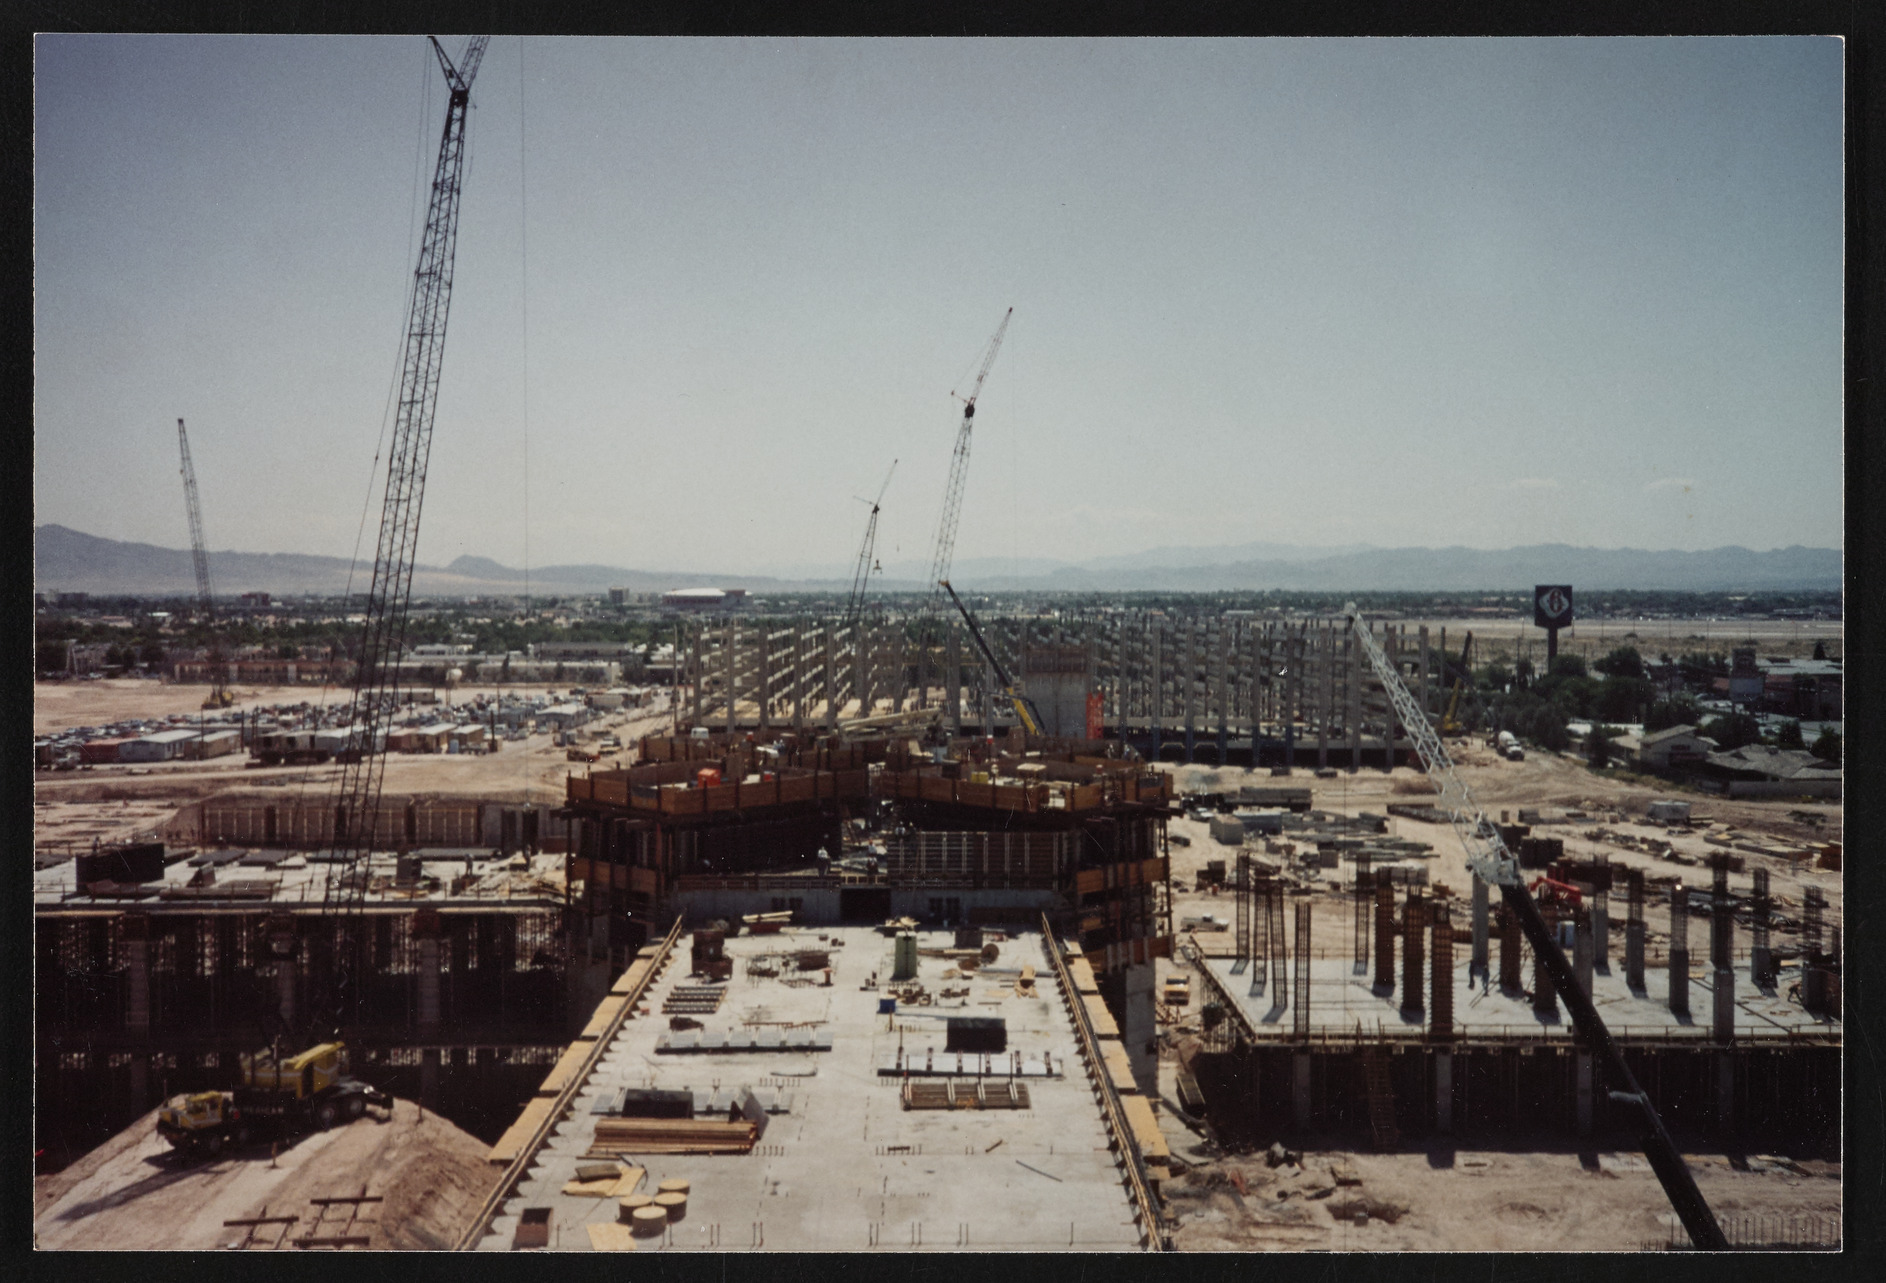 MGM construction party, image 33